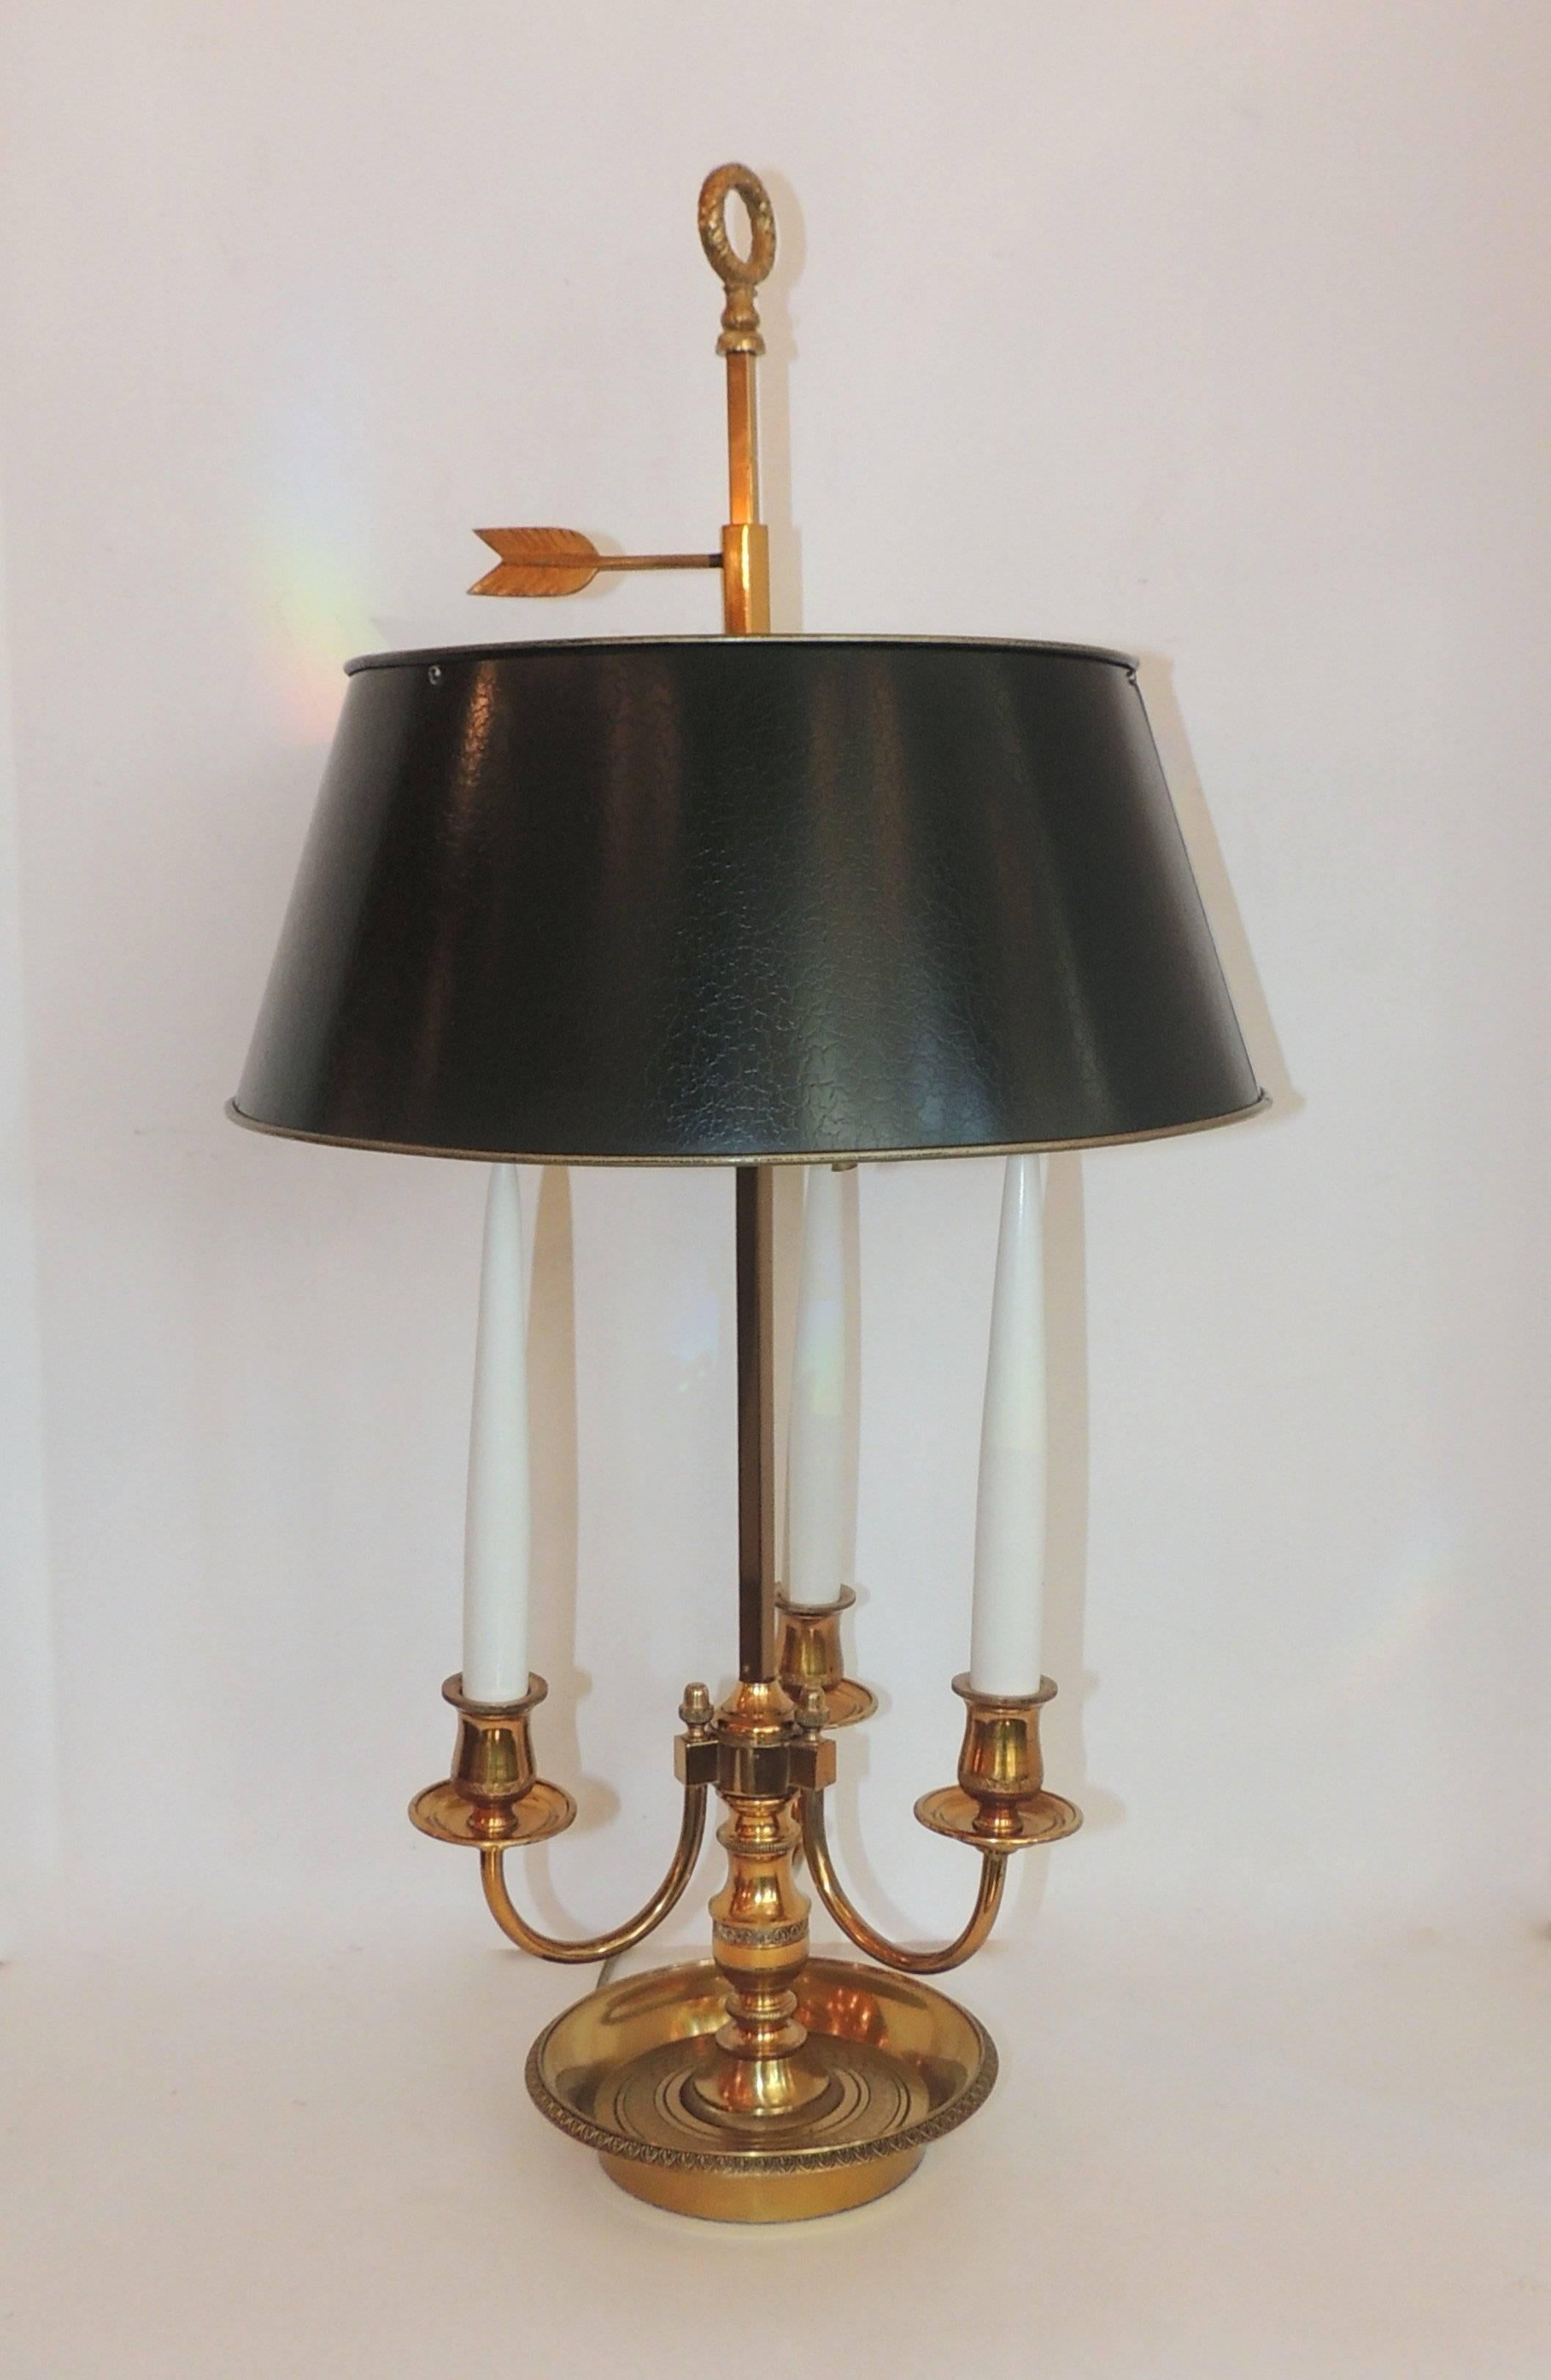 Wonderful French Bouillotte two-light lamp with three candles.
Beautiful etched detail on base and up the center candle cups. Set of three candles and two lights in the lamp. Tole lamp shade in wonderful condition.

Measures: 26